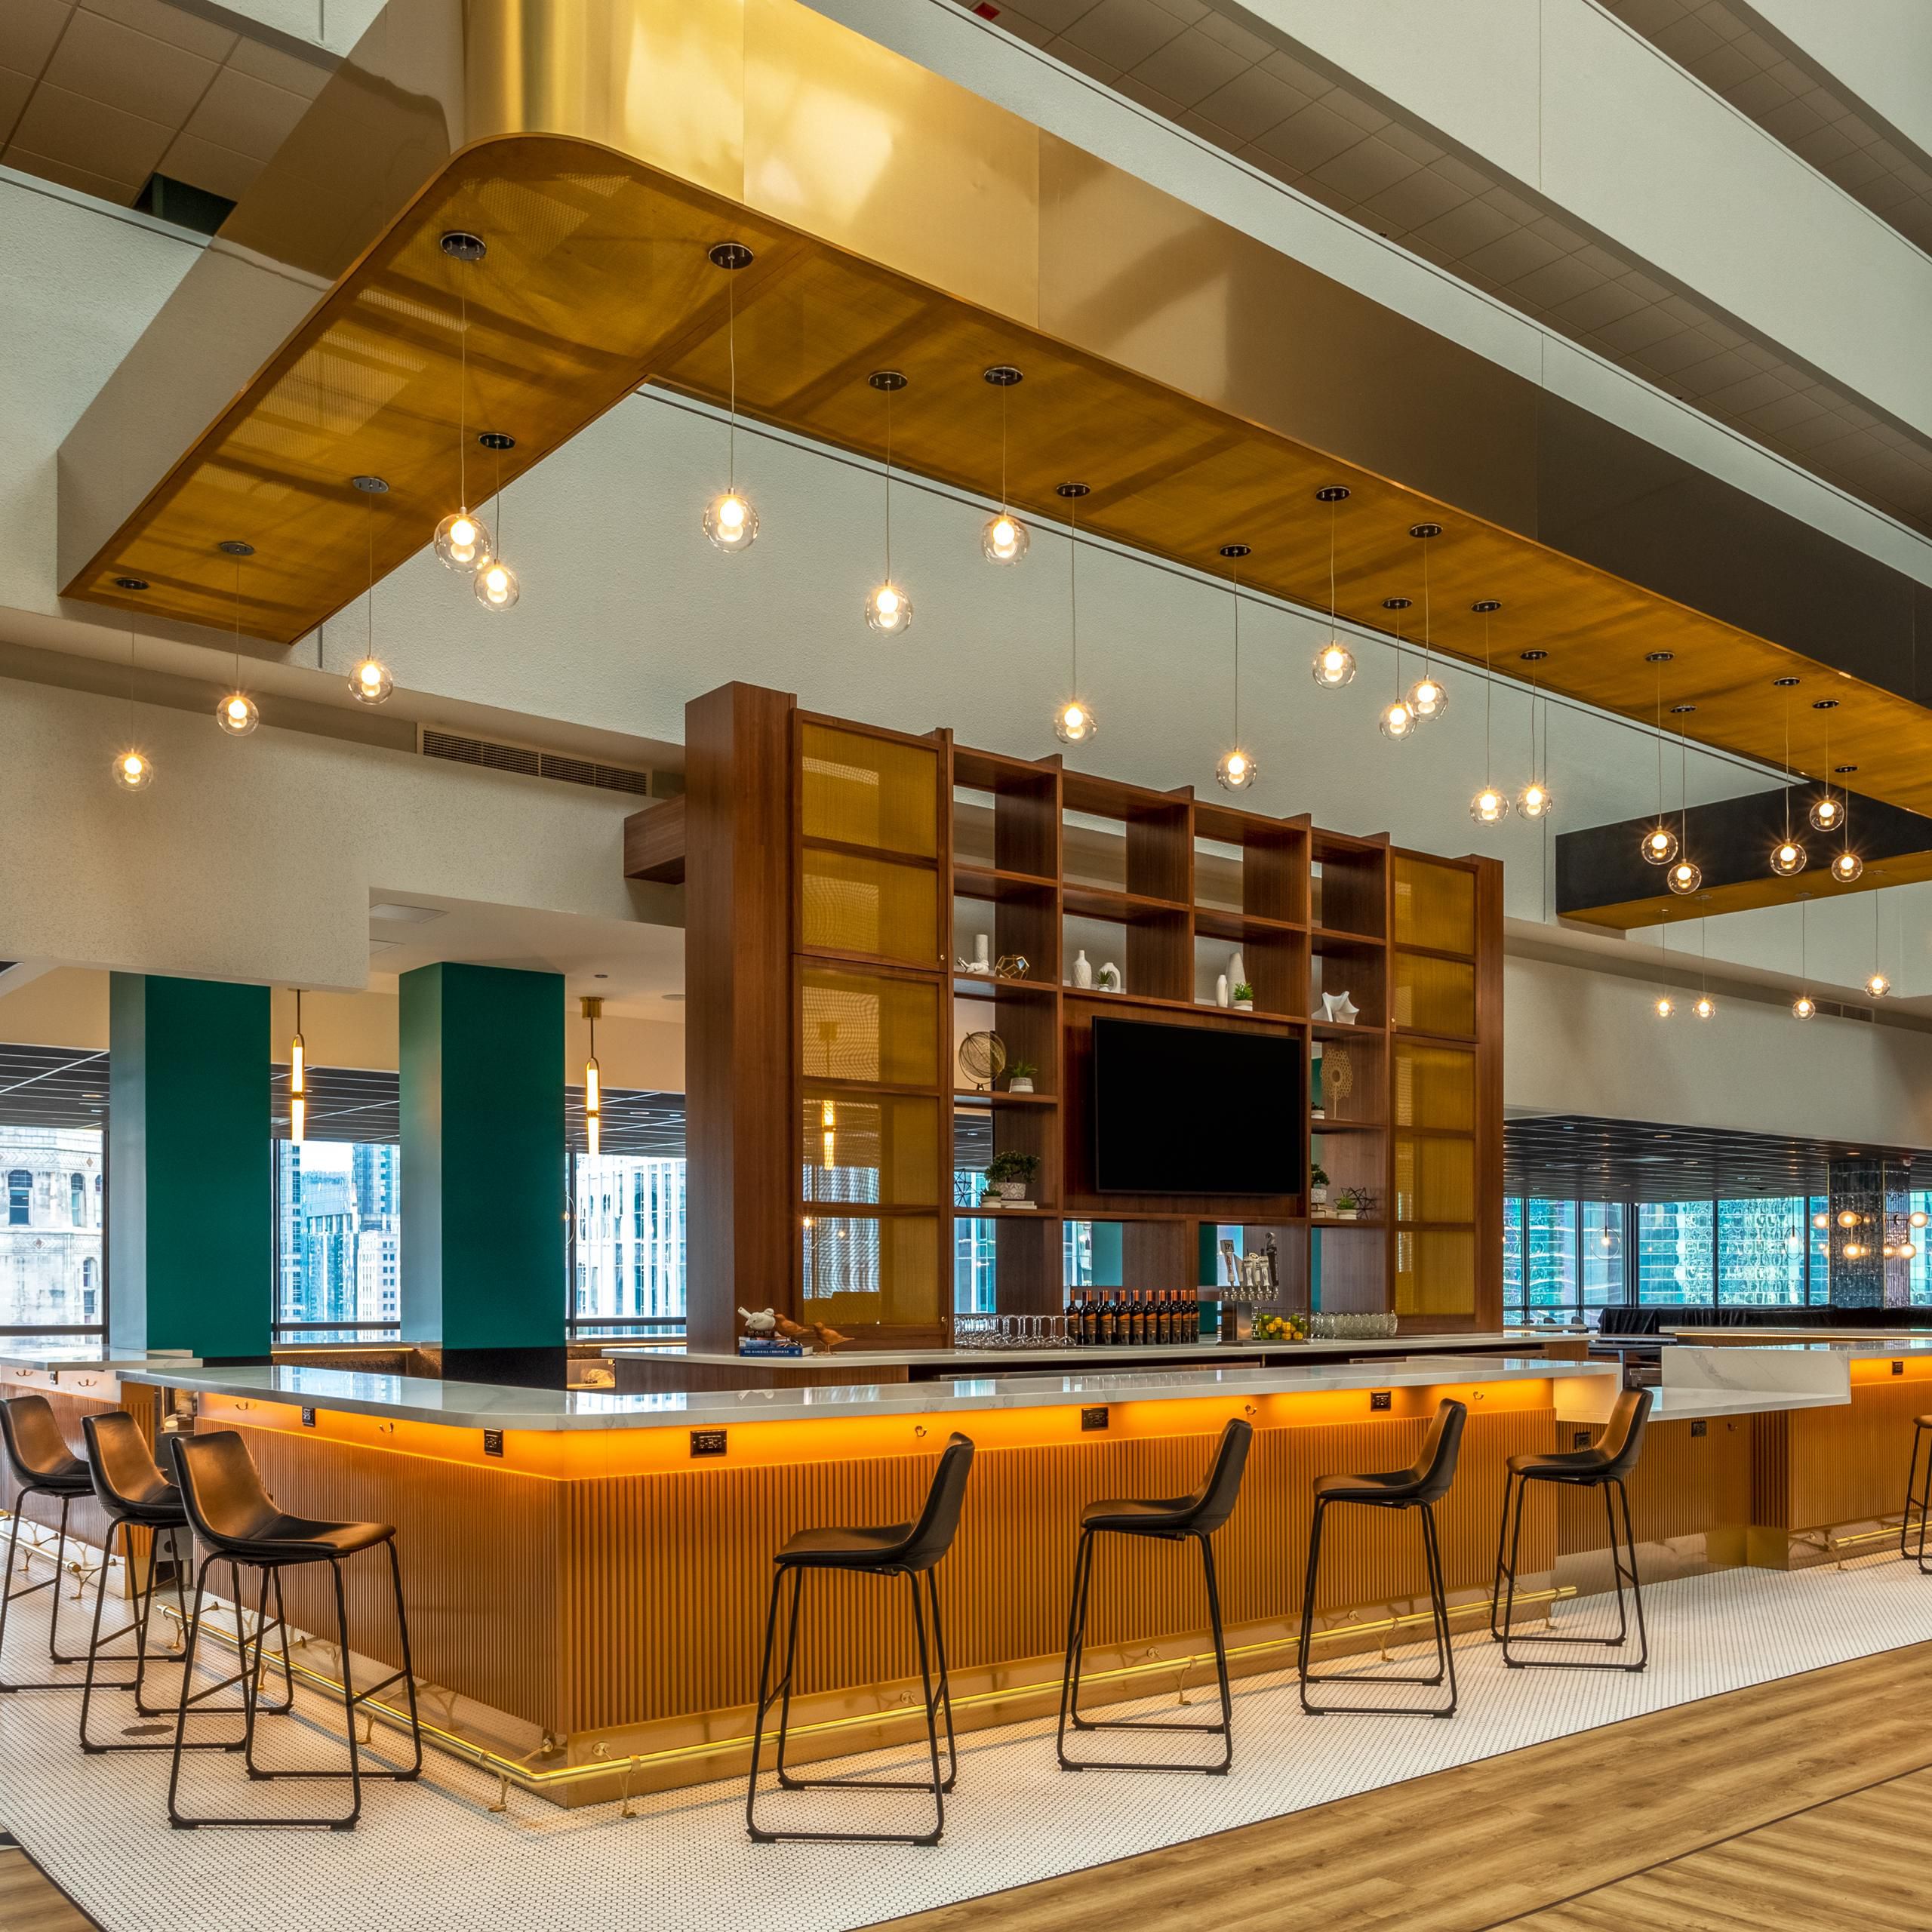 Waterview Kitchen + Bar offers a globally eclectic menu.